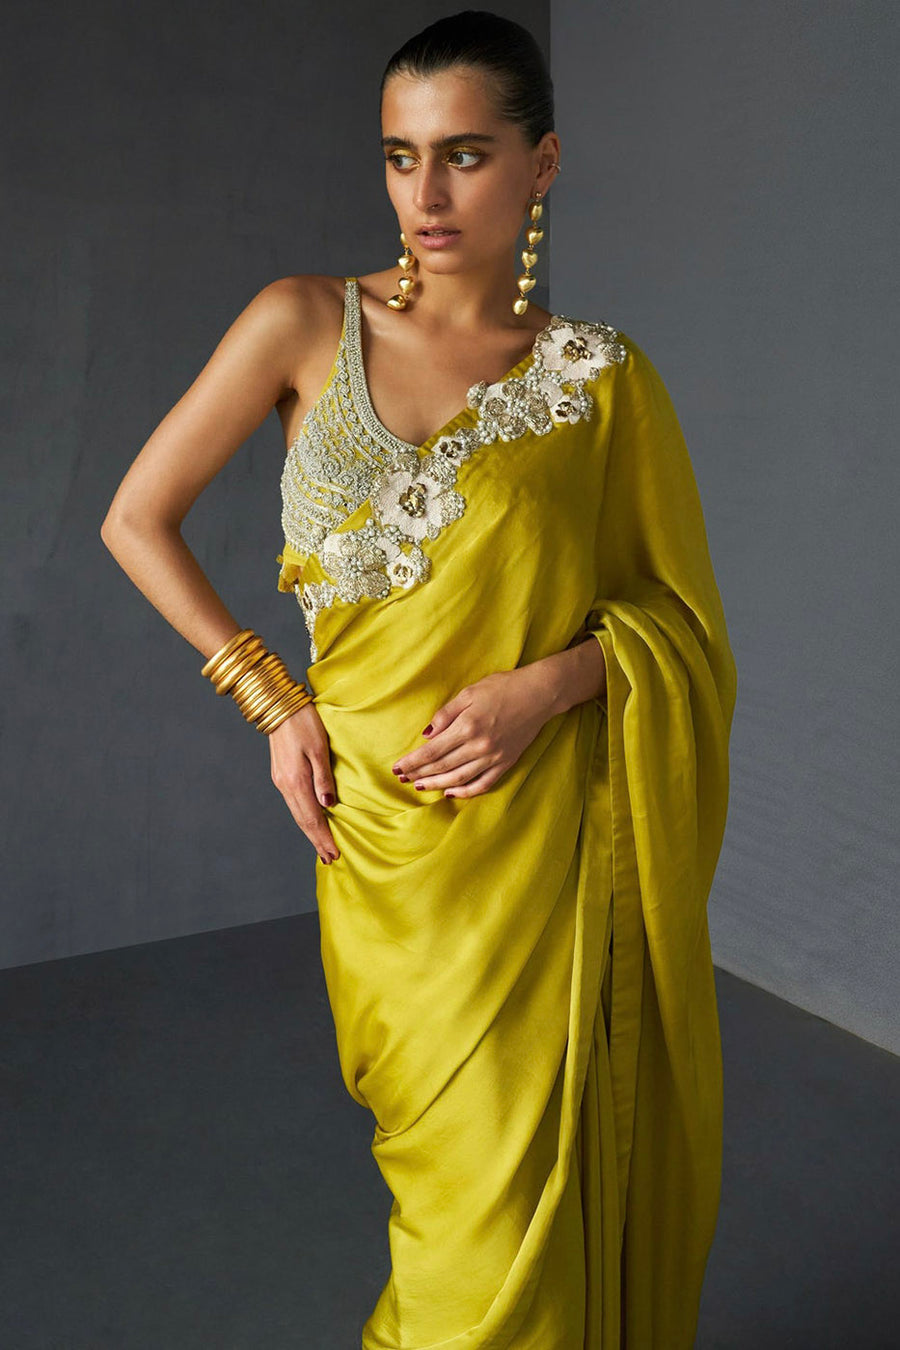 In Full Bloom Yellow Saree with Floral Embroidered Blouse